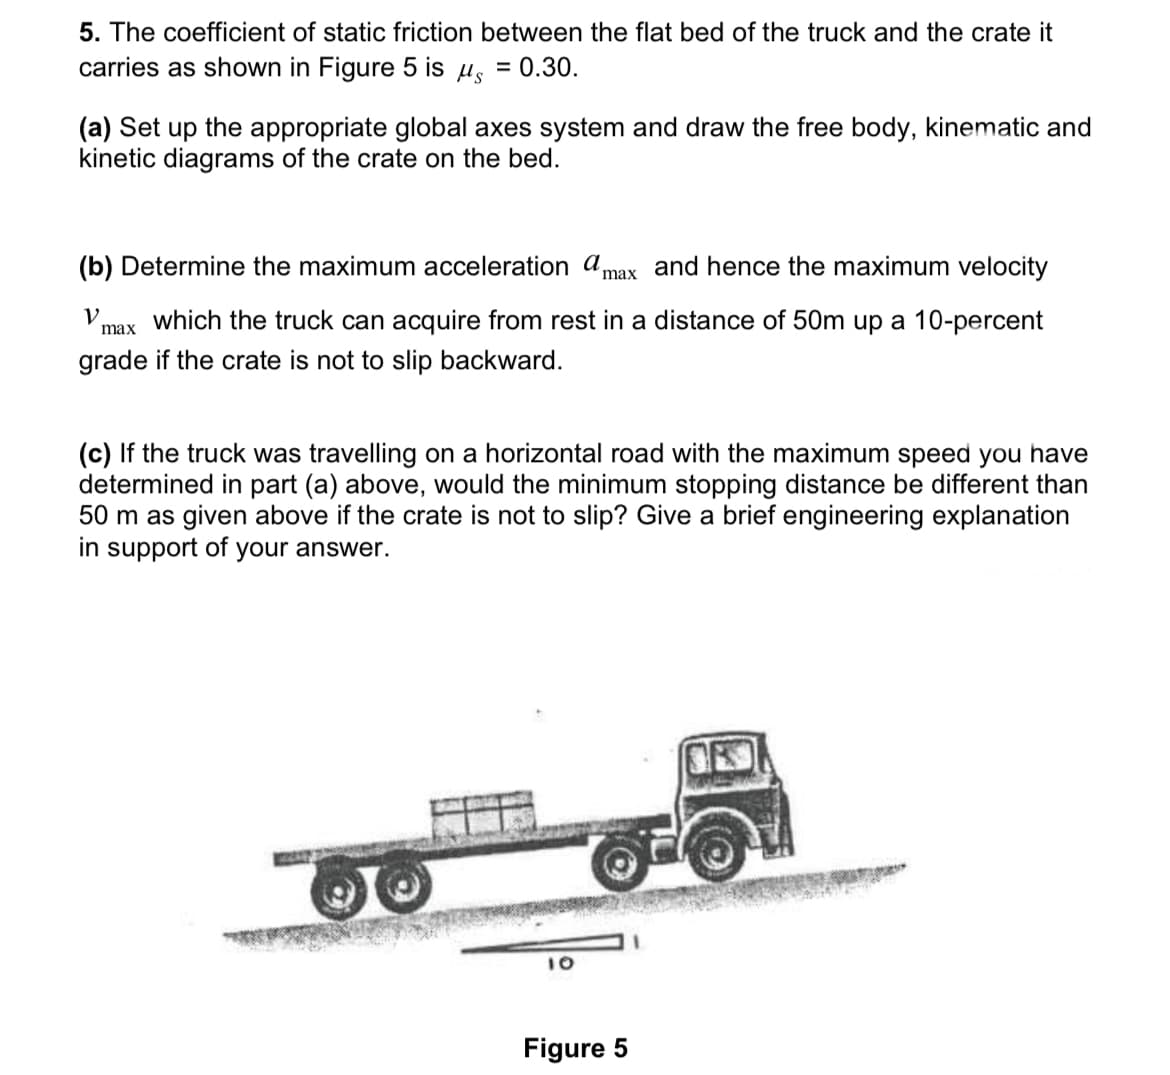 5. The coefficient of static friction between the flat bed of the truck and the crate it
carries as shown in Figure 5 is µ, = 0.30.
(a) Set up the appropriate global axes system and draw the free body, kinematic and
kinetic diagrams of the crate on the bed.
(b) Determine the maximum acceleration amax and hence the maximum velocity
V
max
which the truck can acquire from rest in a distance of 50m up a 10-percent
grade if the crate is not to slip backward.
(c) If the truck was travelling on a horizontal road with the maximum speed you have
determined in part (a) above, would the minimum stopping distance be different than
50 m as given above if the crate is not to slip? Give a brief engineering explanation
in support of your answer.
10
Figure 5
